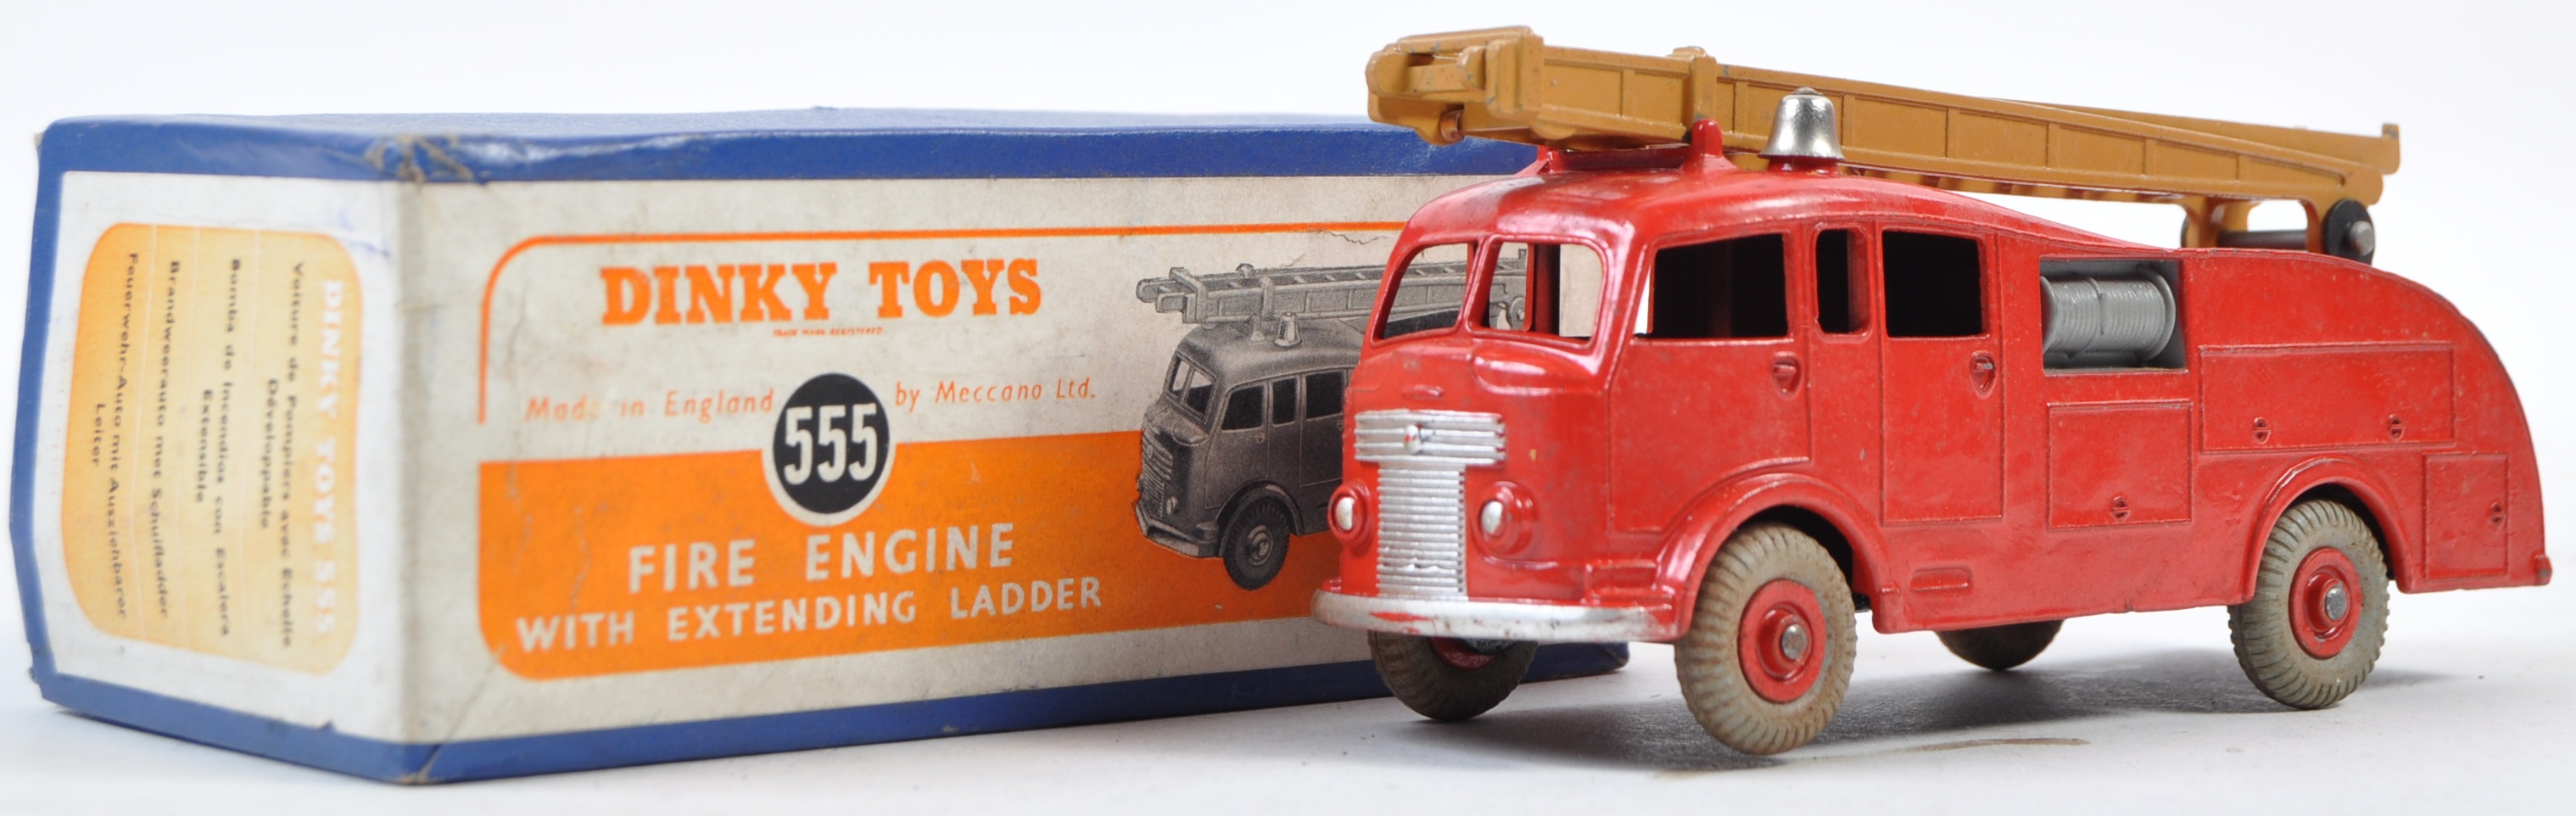 DINKY TOYS NO 555 FIRE ENGINE WITH BROWN LADDER AND RED HUBS - Image 6 of 8